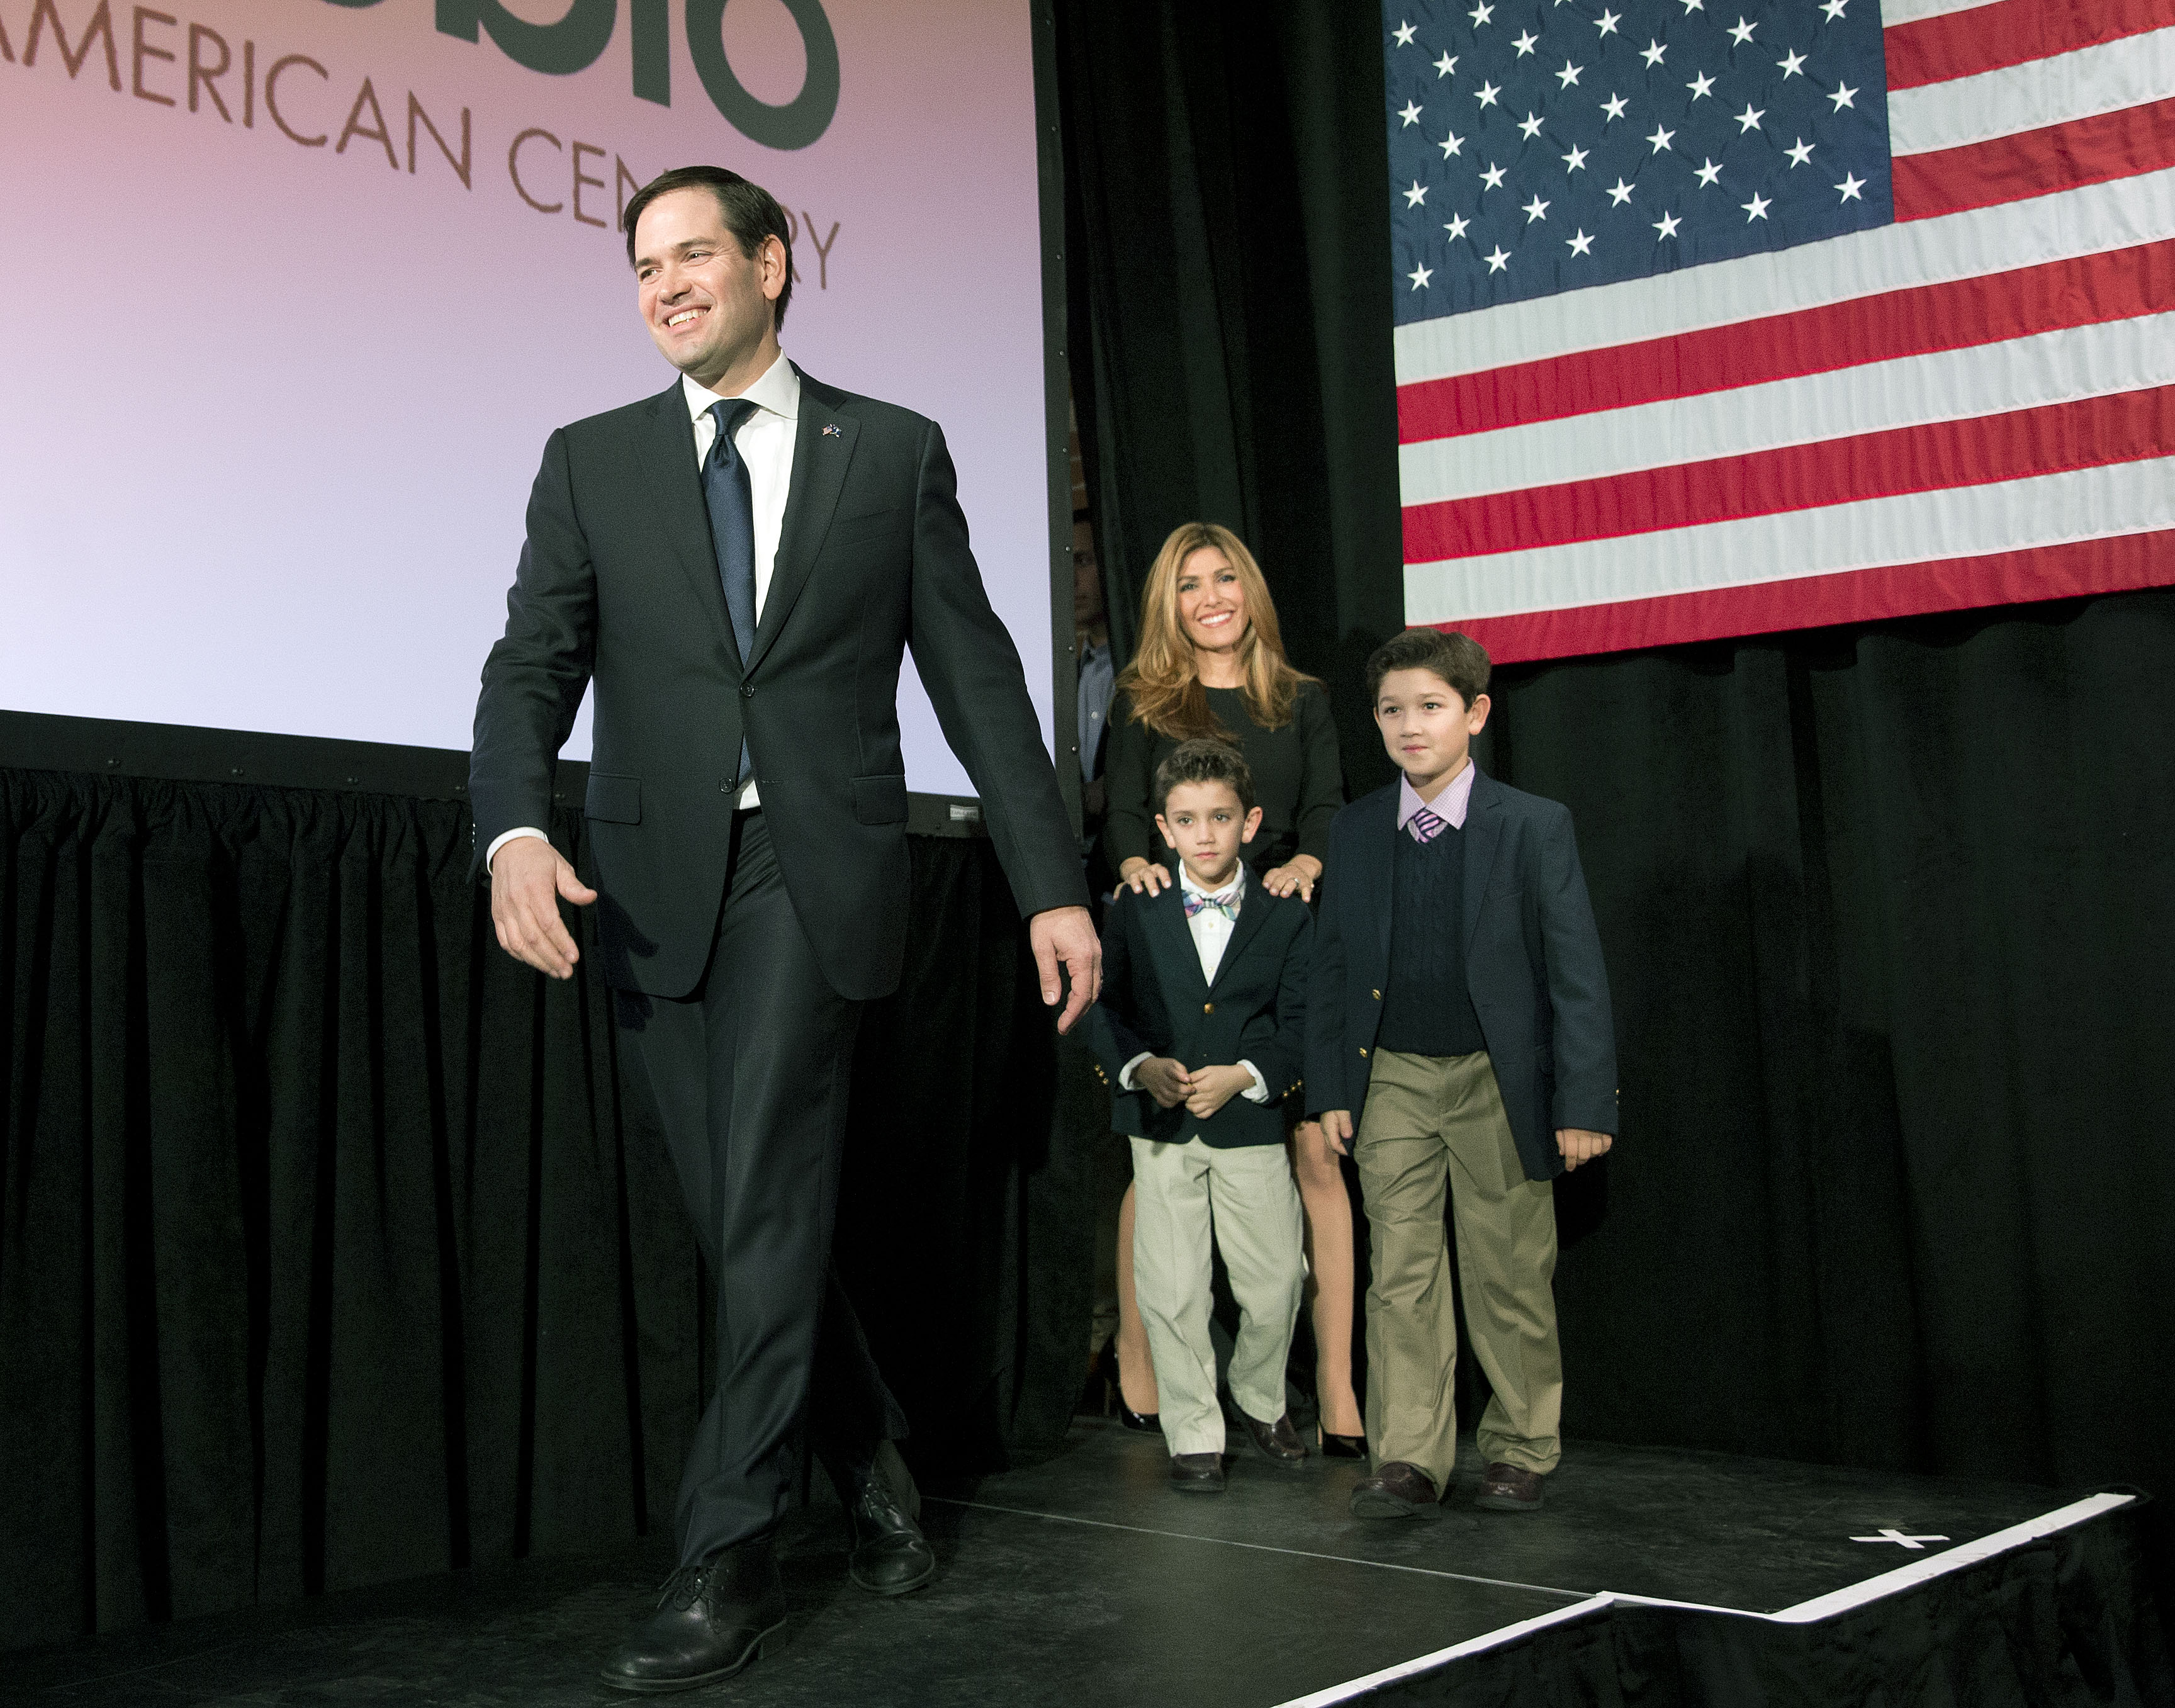 Republican presidential candidate Sen. Marco Rubio, R-Fla, is followed on stage by his wife Jeanette and sons Dominick, left, and Anthony during an election-night rally Saturday, Feb. 20, 2016, in Columbia, S.C. (AP Photo/John Bazemore)